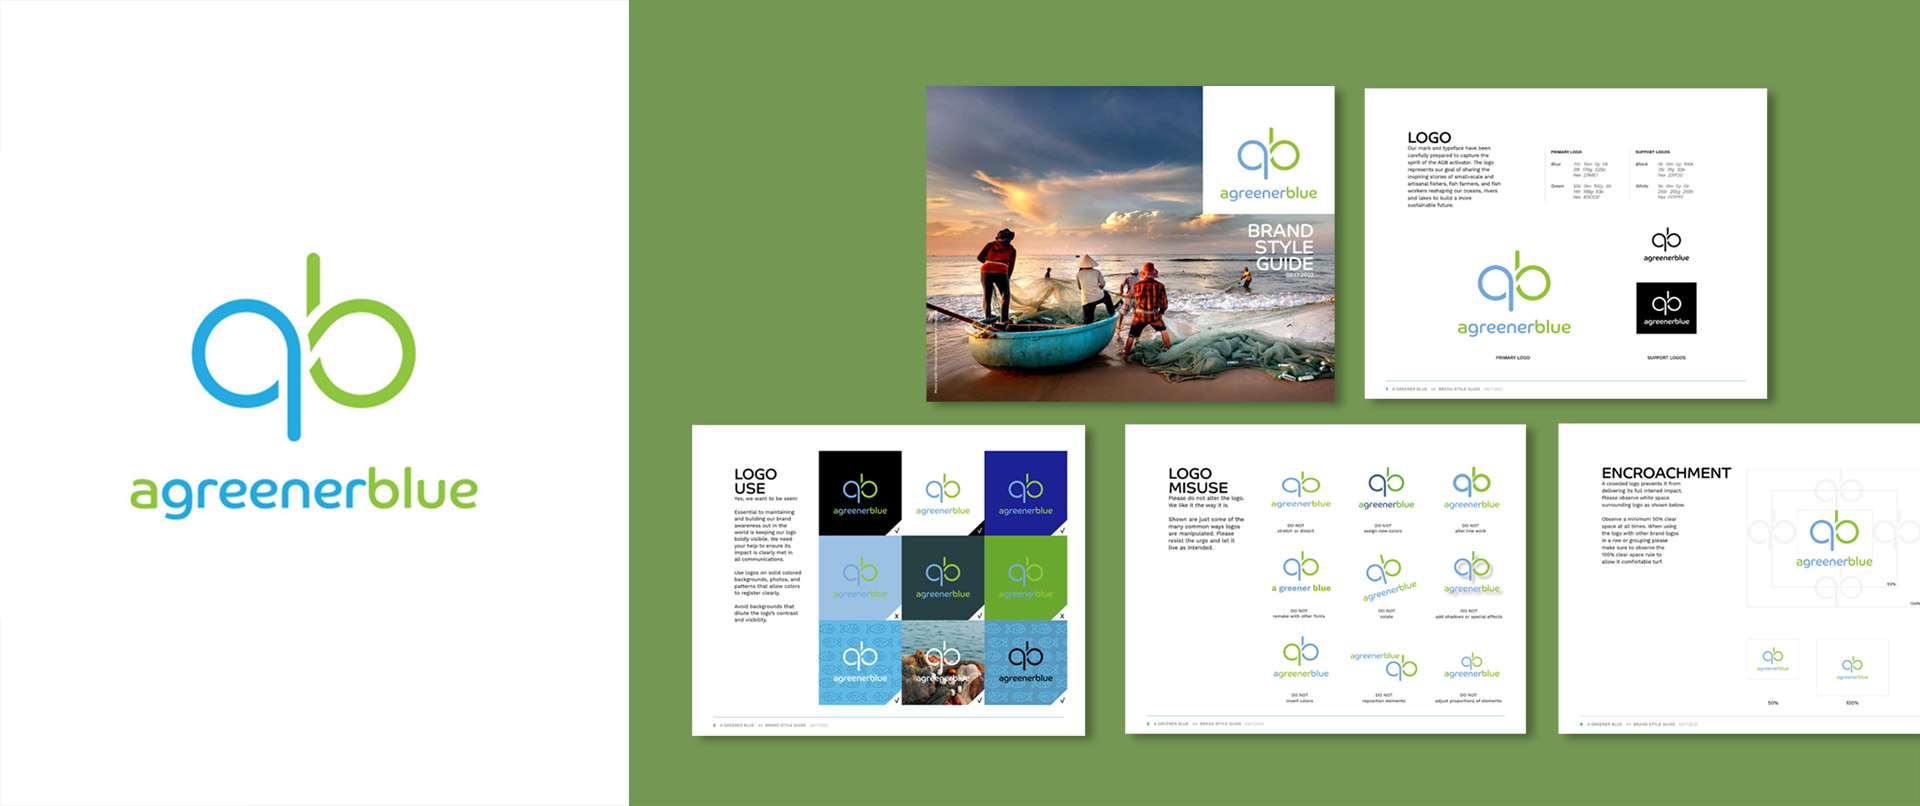 image of brand identity system and style guide for A Greener Blue